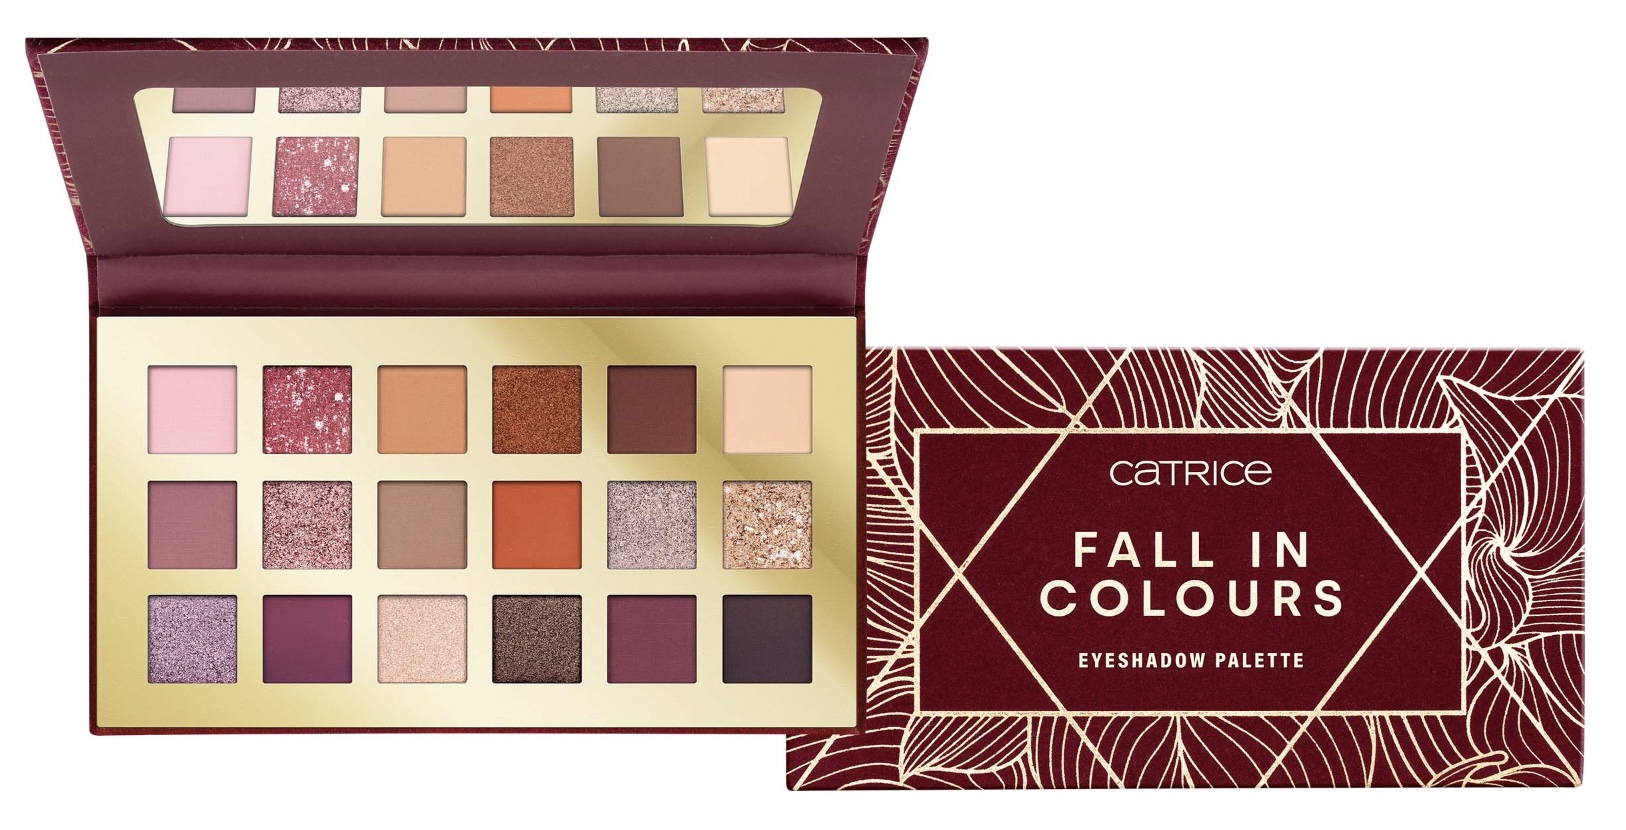 Catrice Fall in Colours Eyeshadow palette